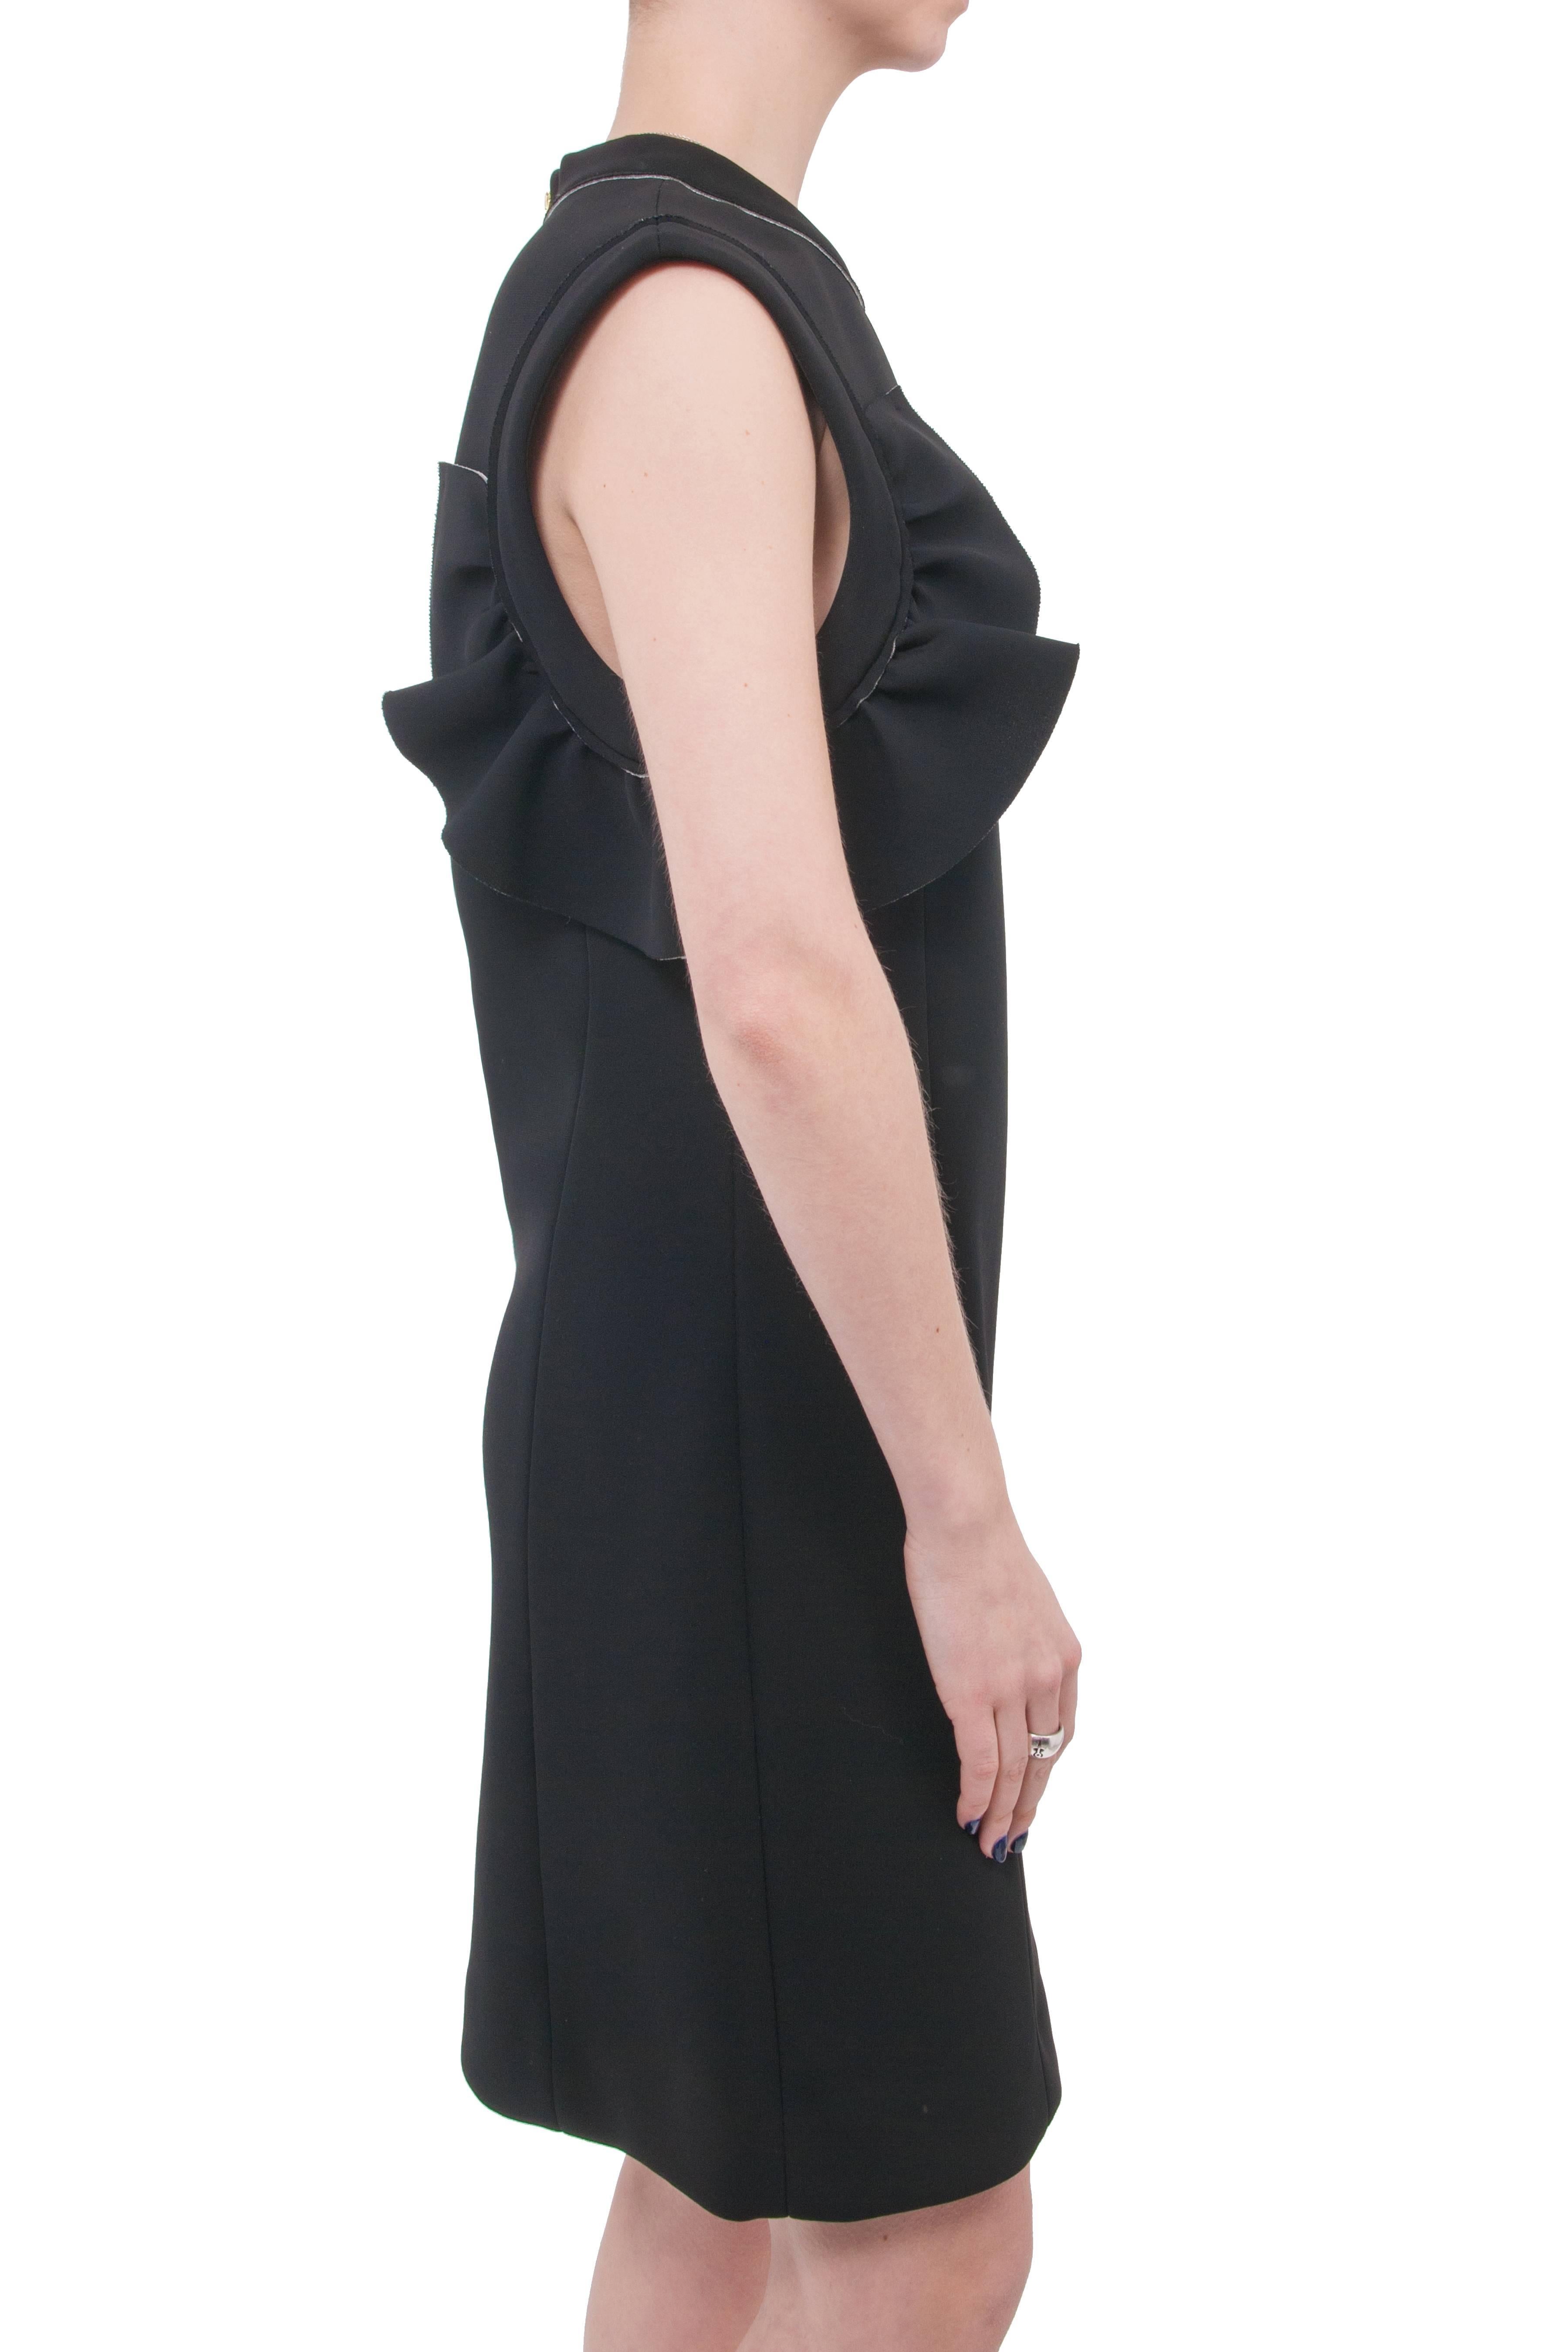 Marni Black Neoprene Sleeveless Ruffle Dress.  Rounded neckline, exposed gold metal centre back zipper, double faced black and light grey fabric, straight-cut body. Marked size IT 42 (USA 6 but fits larger and is recommended for USA 8 /10).  Garment